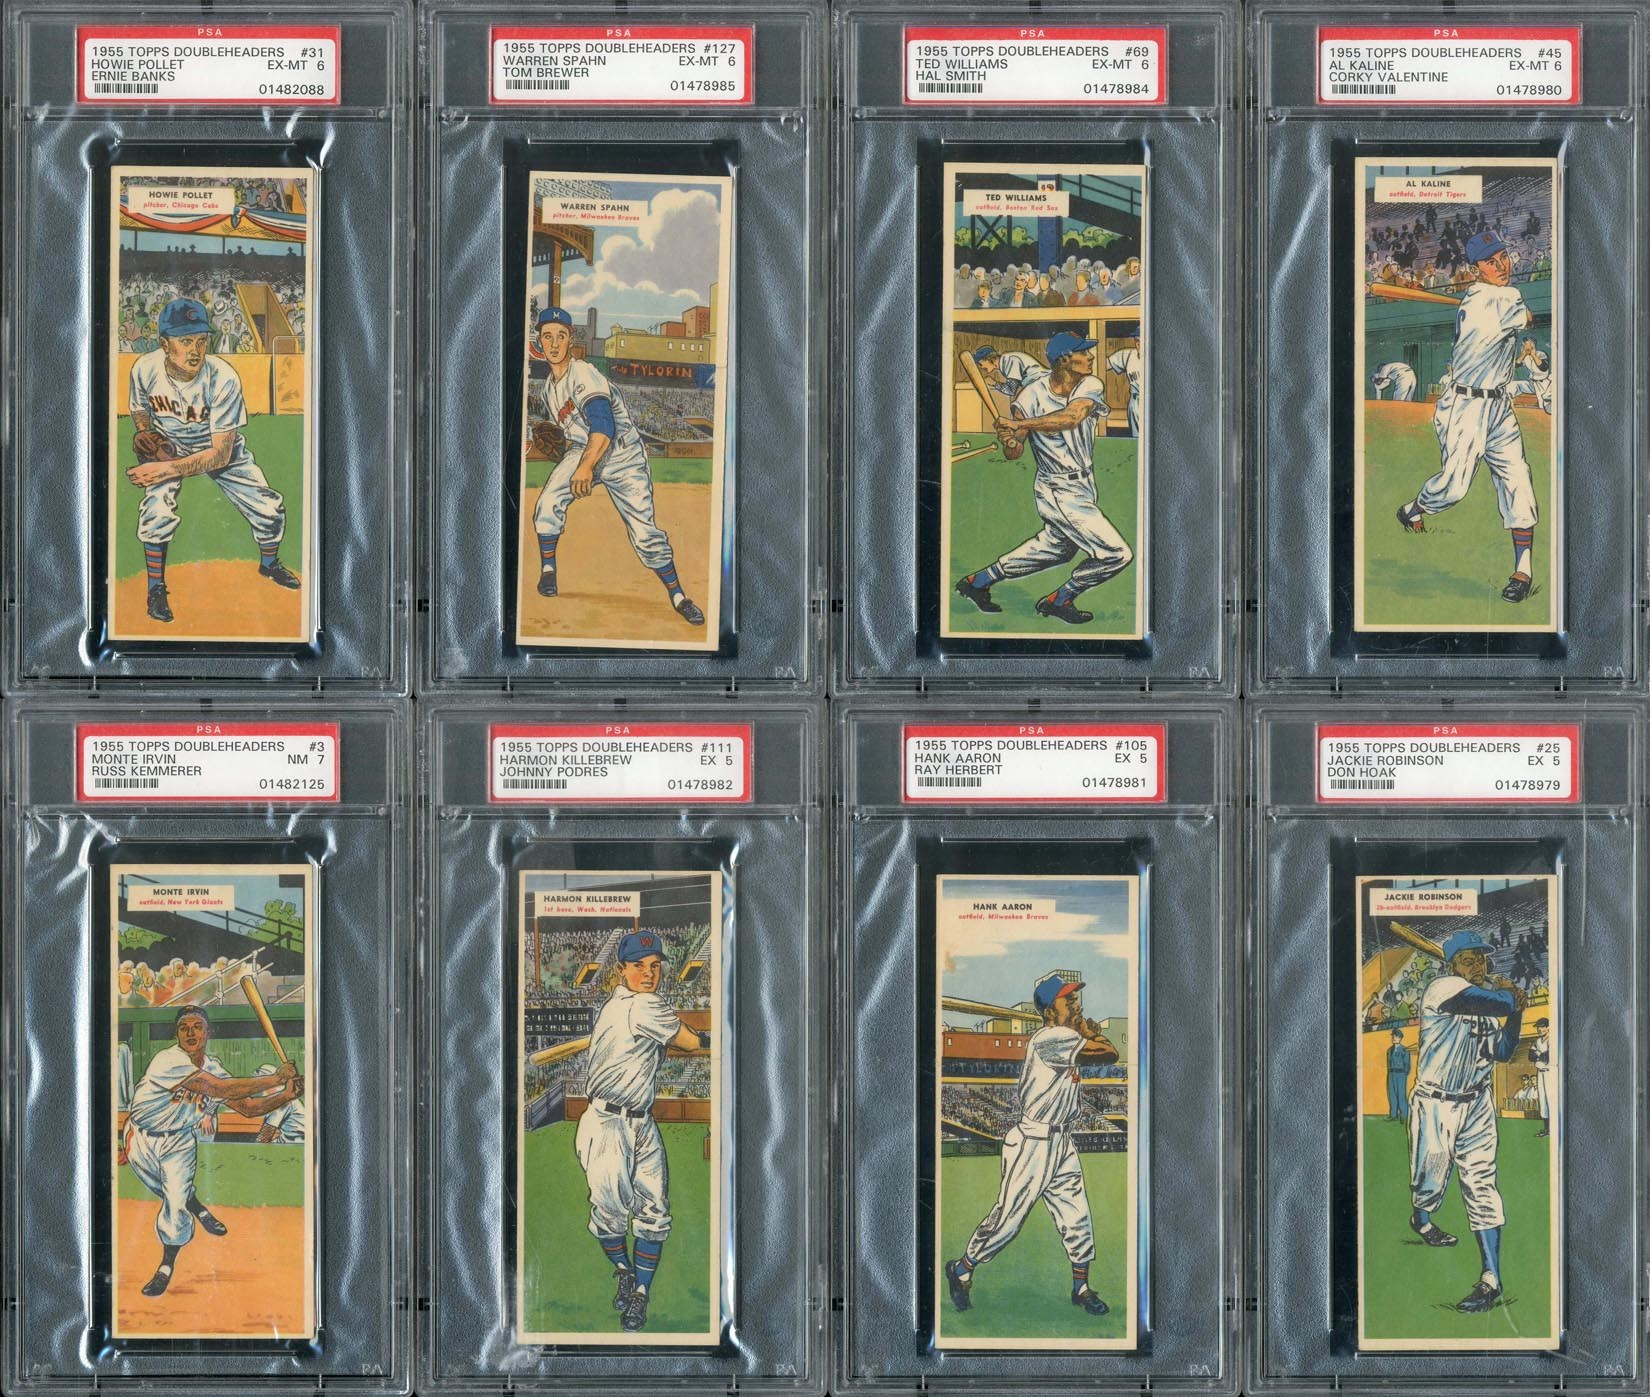 Baseball and Trading Cards - 1955 Topps Doubleheaders Complete PSA Graded Set - #14 on PSA Registry